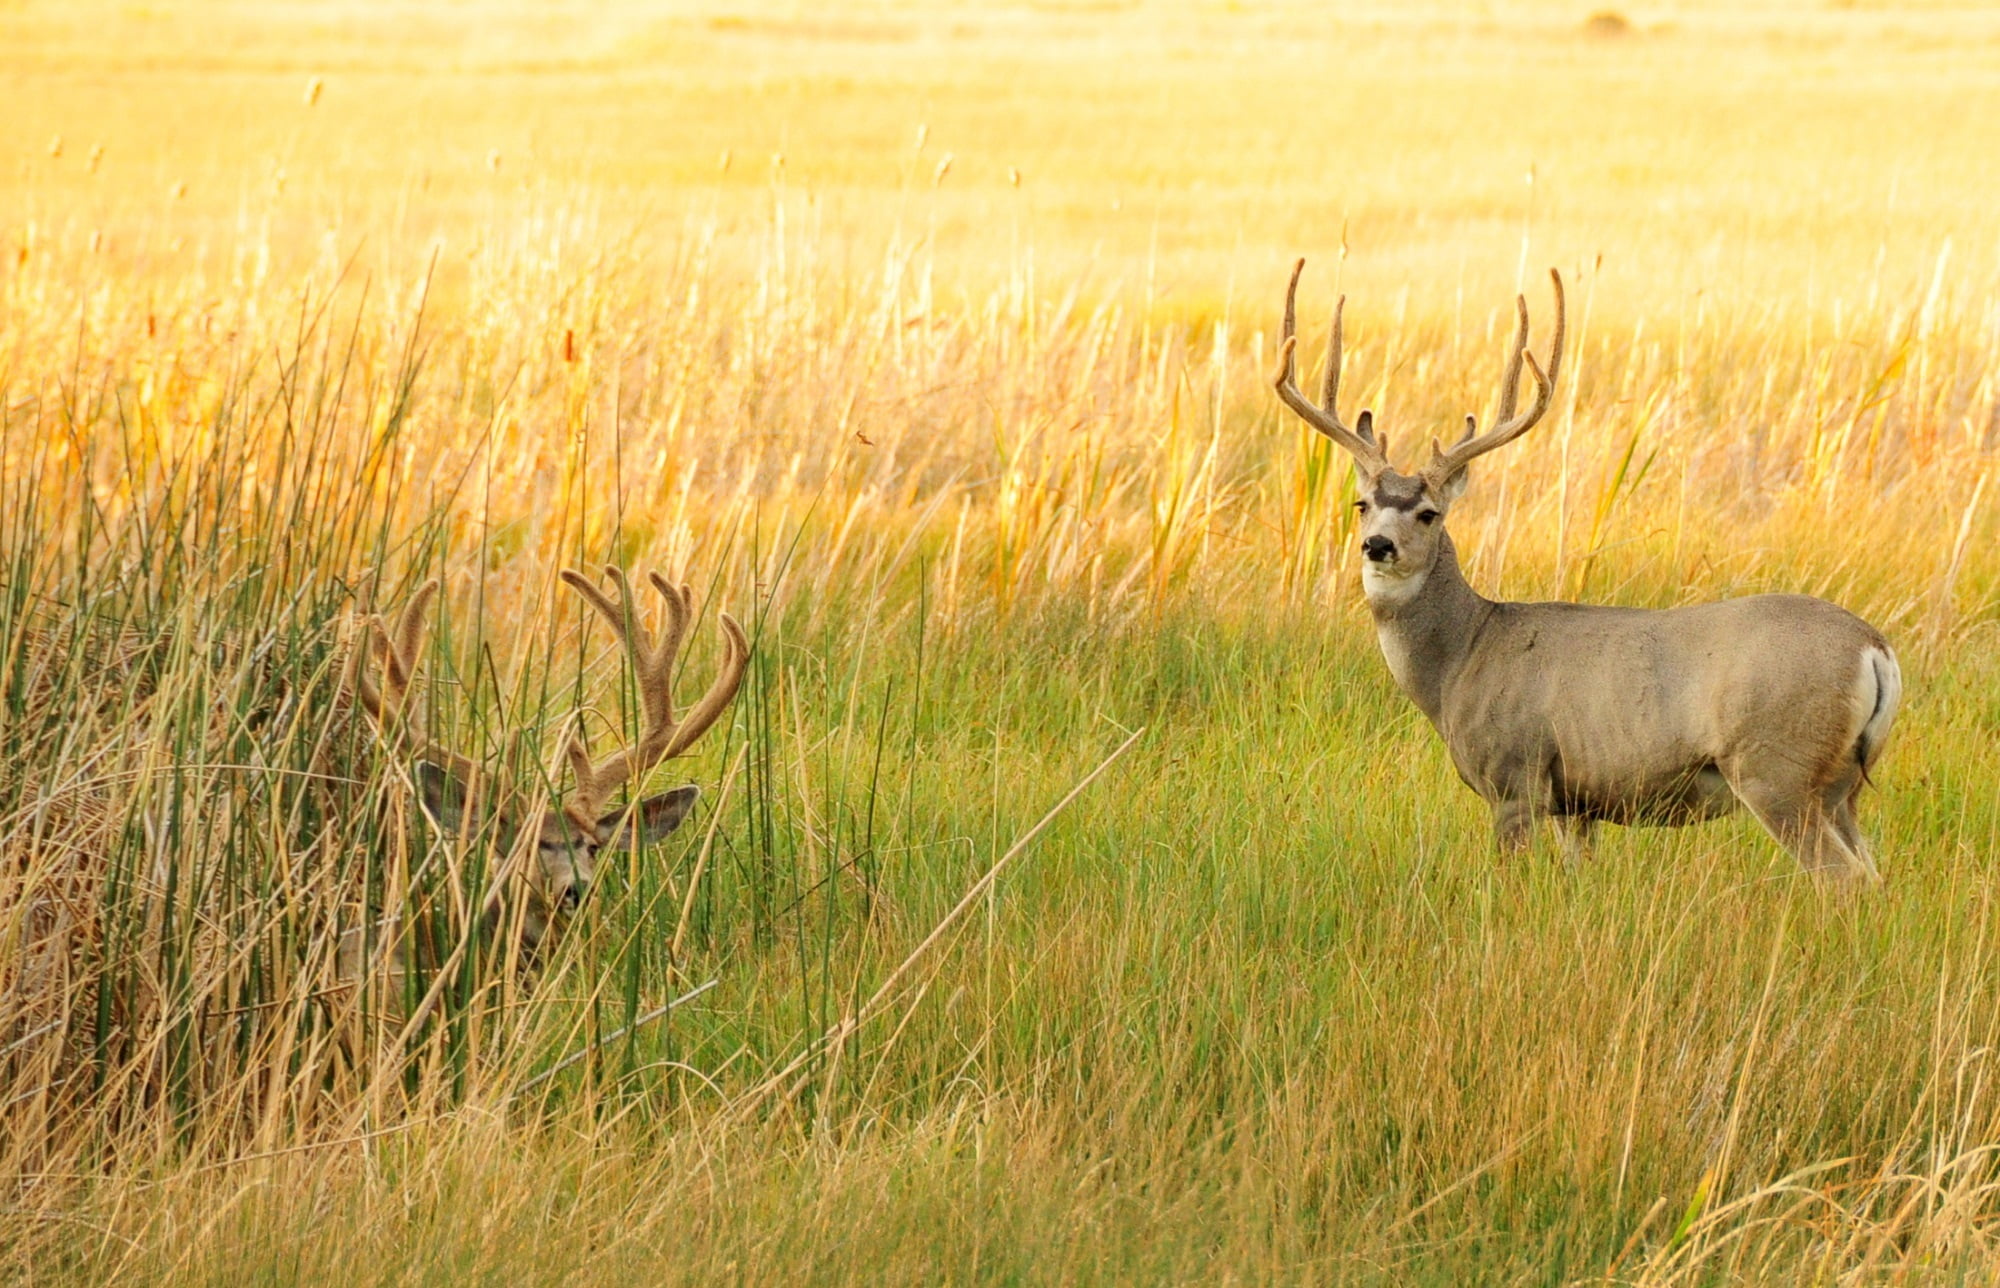 brown Deer in wild grass during day time